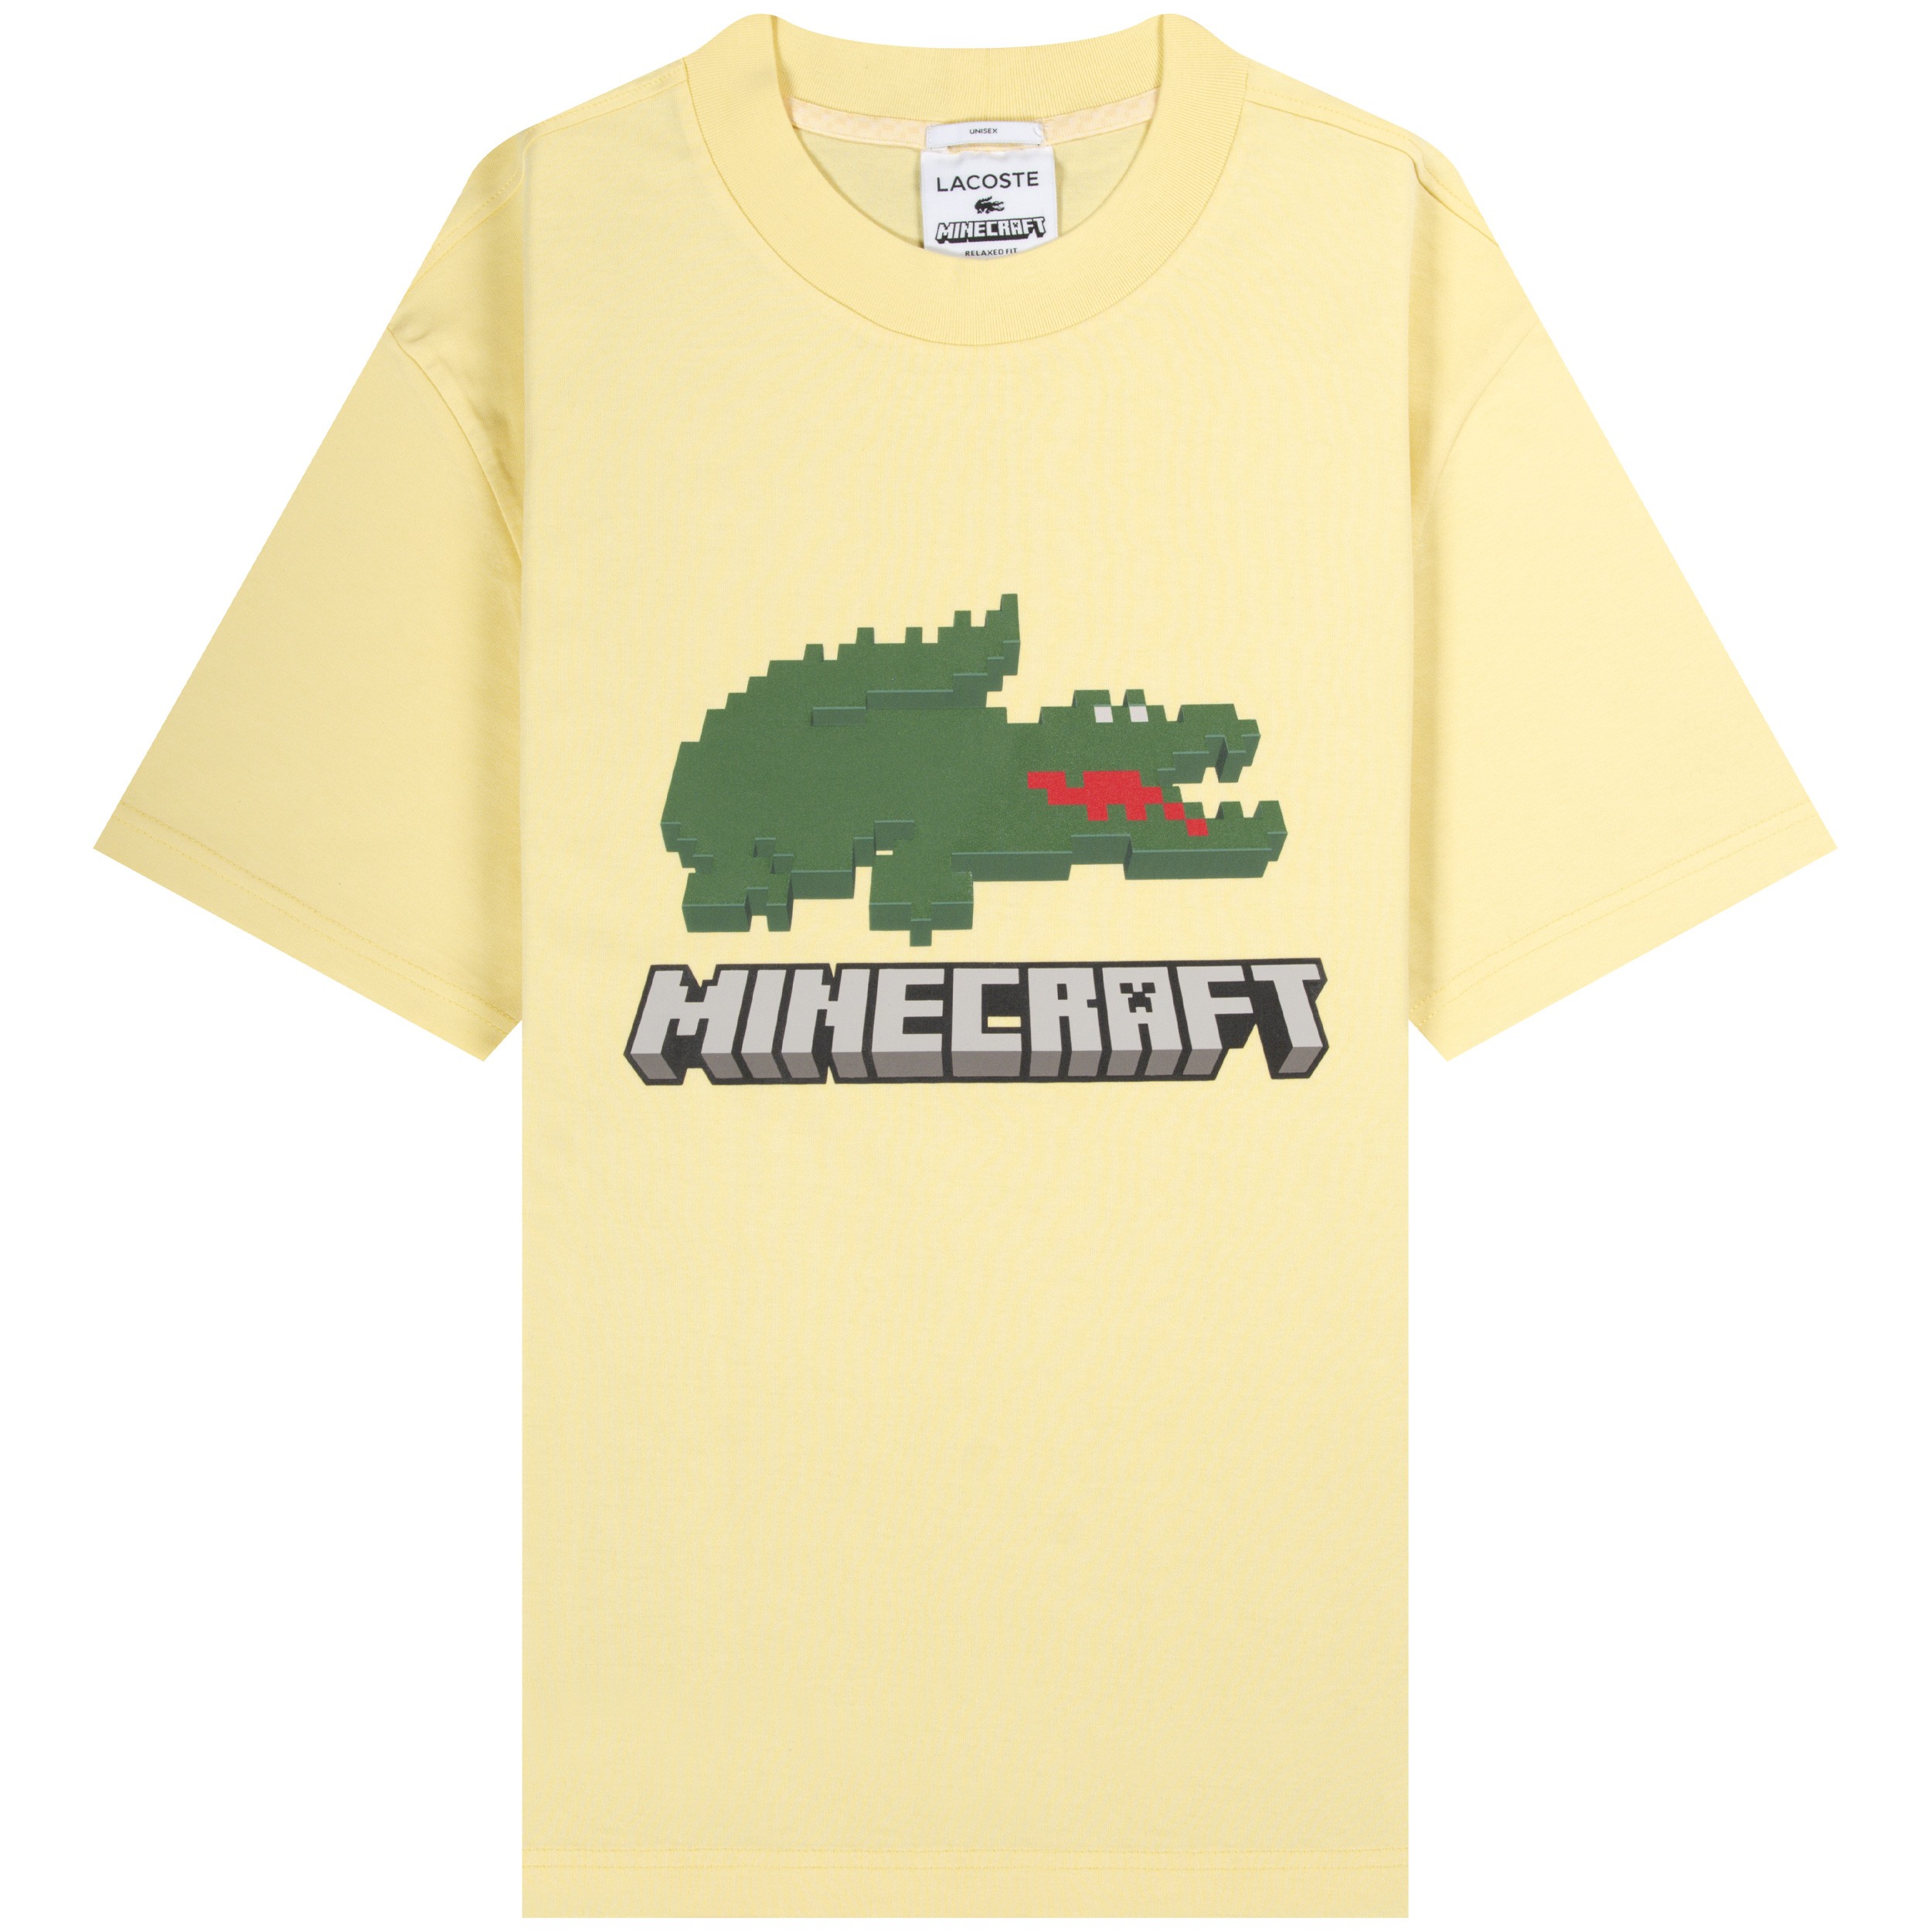 https://www.pockets.co.uk/media/catalog/product/cache/afca9a4301a4f957e27126911791b579/l/a/lacoste_ss22_tshirt_minecraft_yellow__.jpg